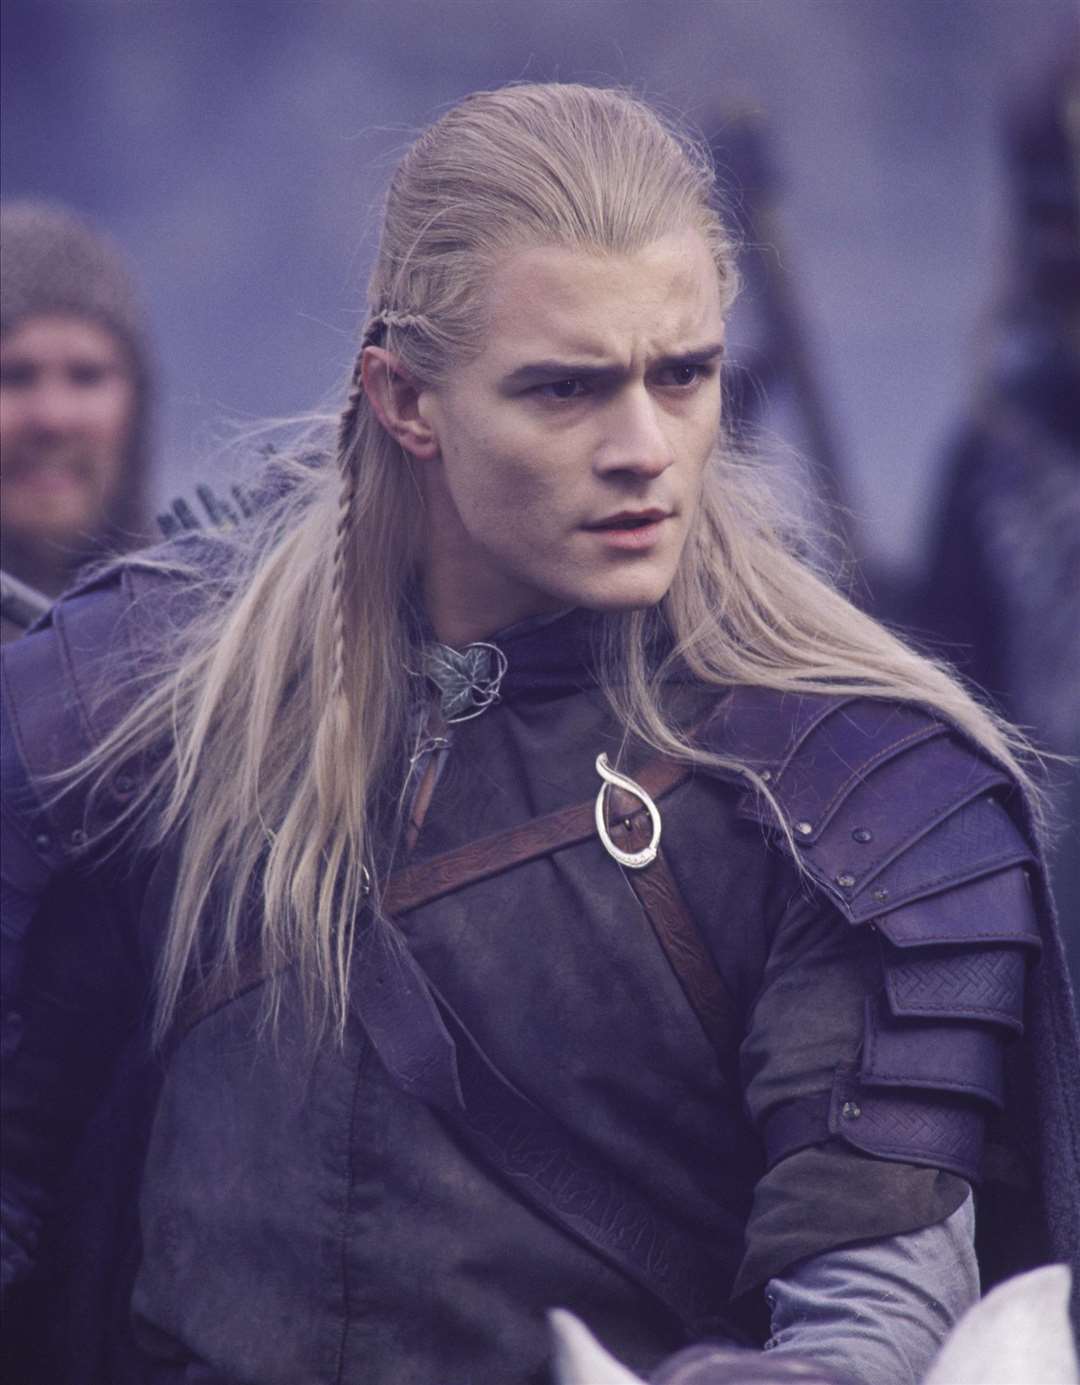 Orlando Bloom as Legolas in The Lord of the Rings: The Two Towers.